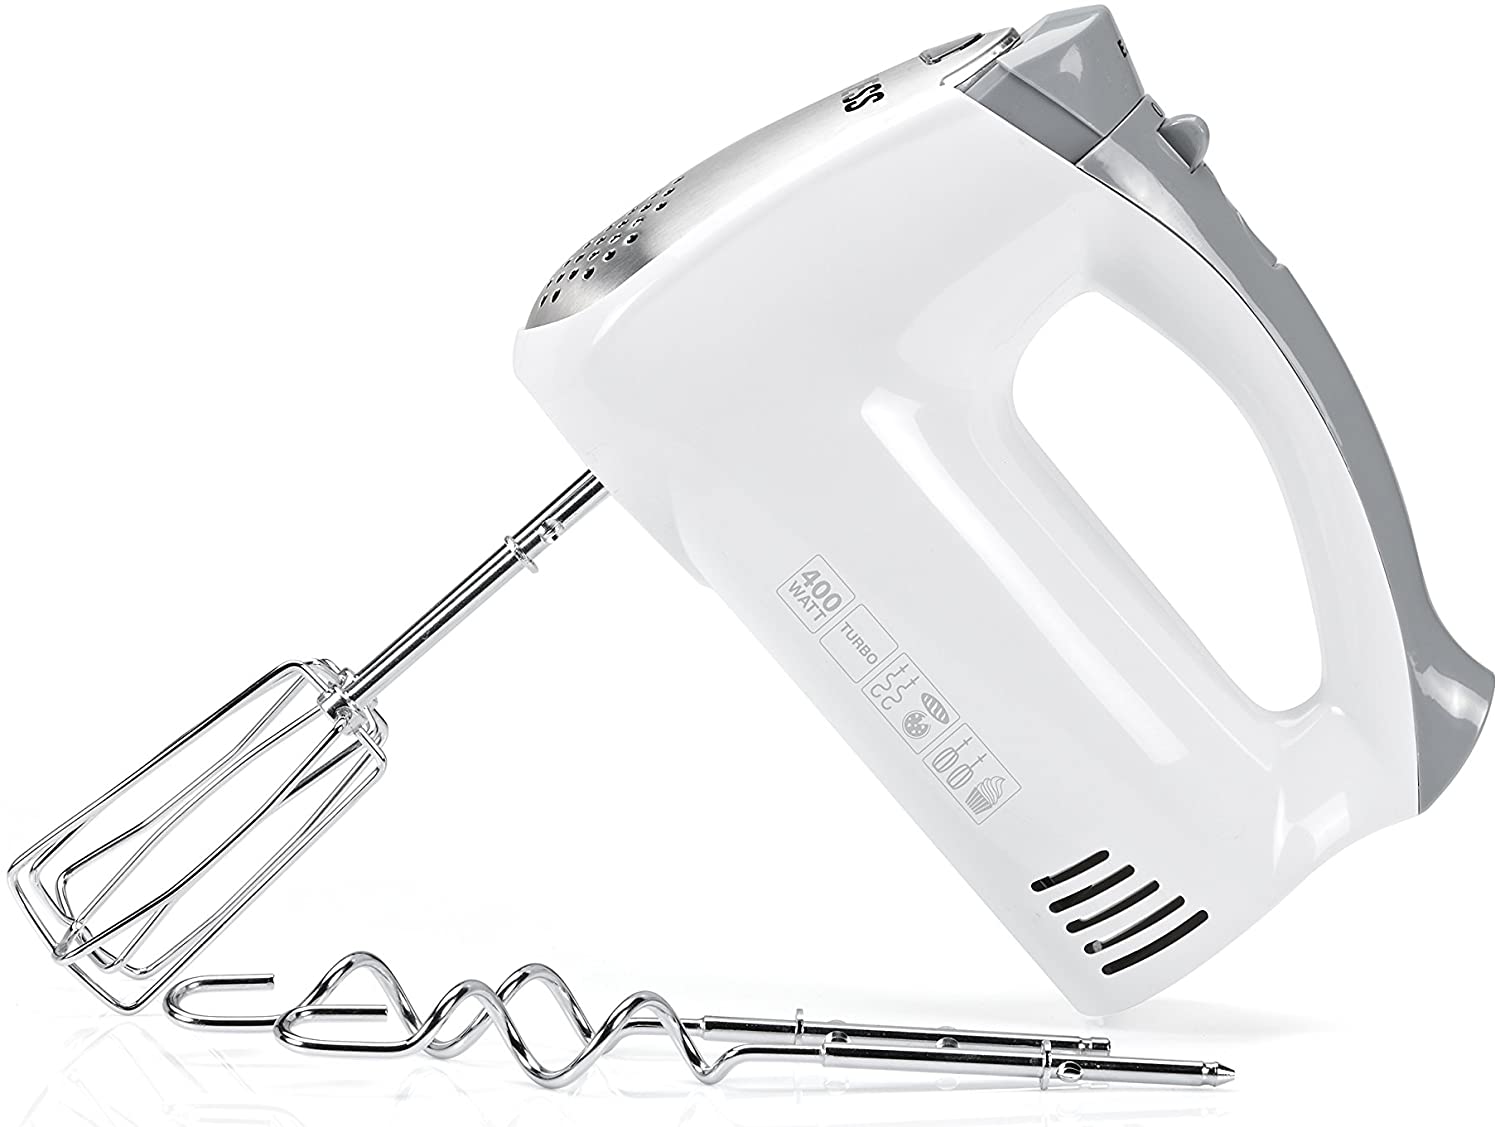 Princess 01.222202.01.001 Hand Mixer Turbo 400 W Stainless Steel Dough Hook and Whisk, White